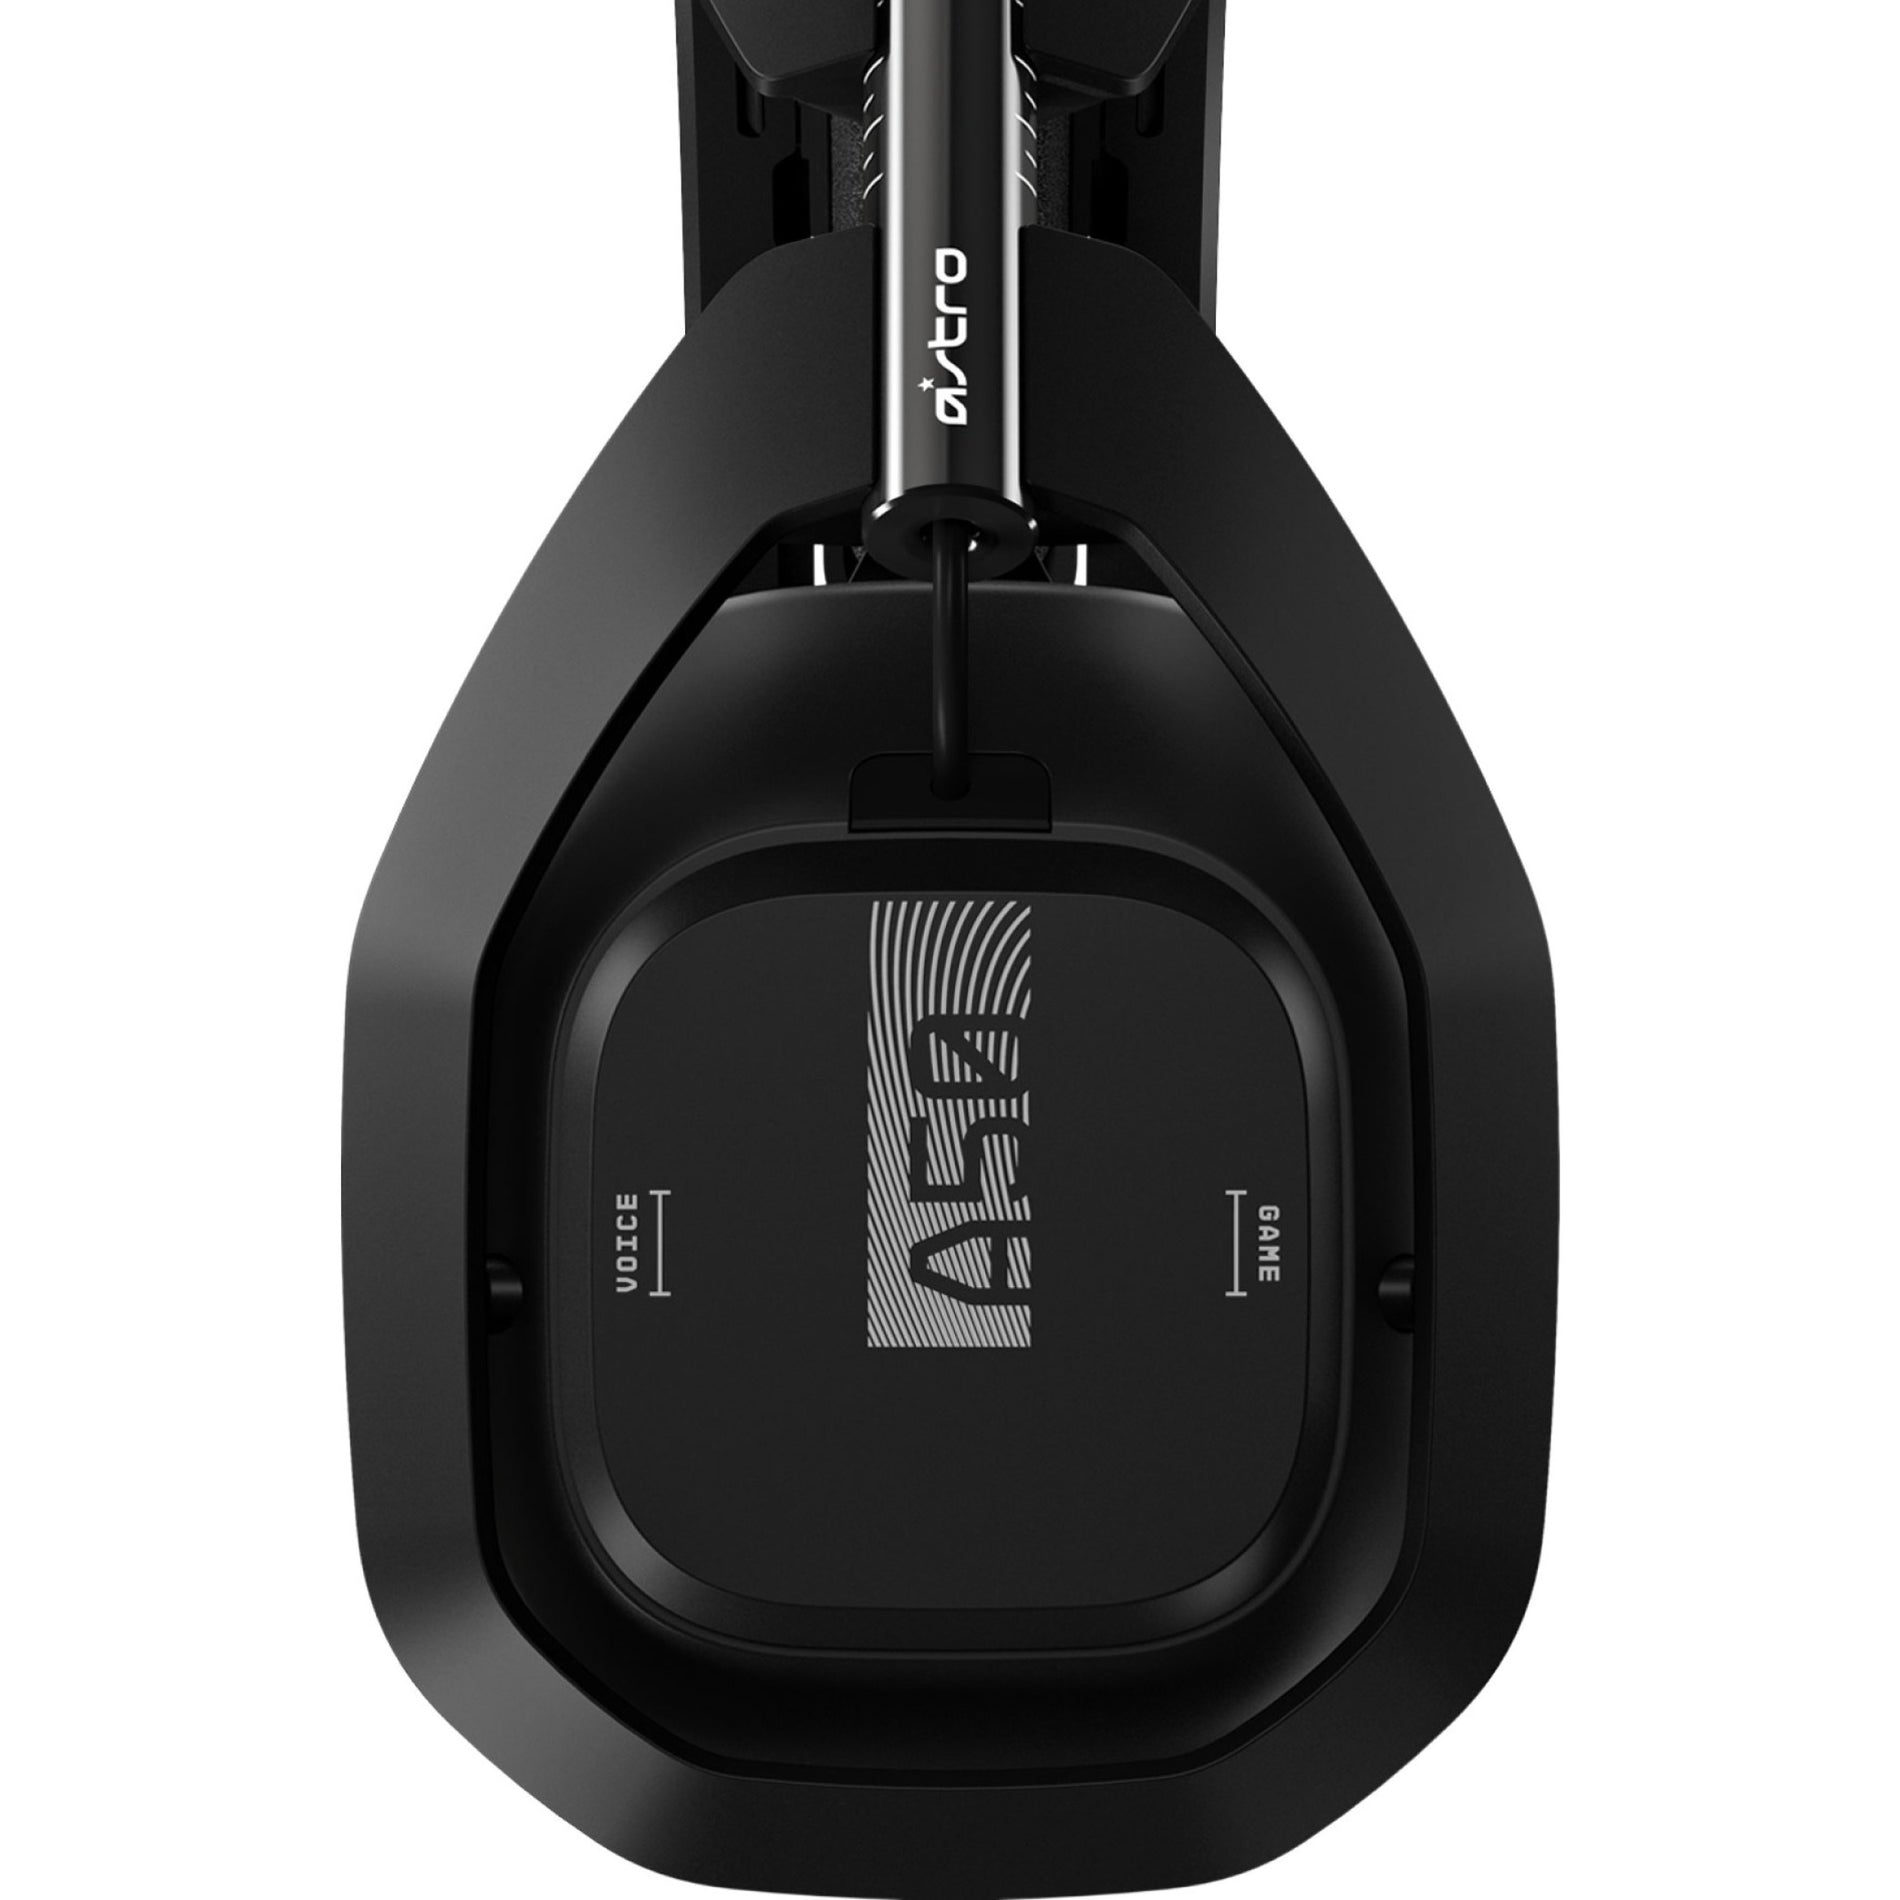 Astro 939-001673 A50 Wireless Headset with Lithium-Ion Battery, Durable, High-Resolution Audio, Flip to Mute, Comfortable